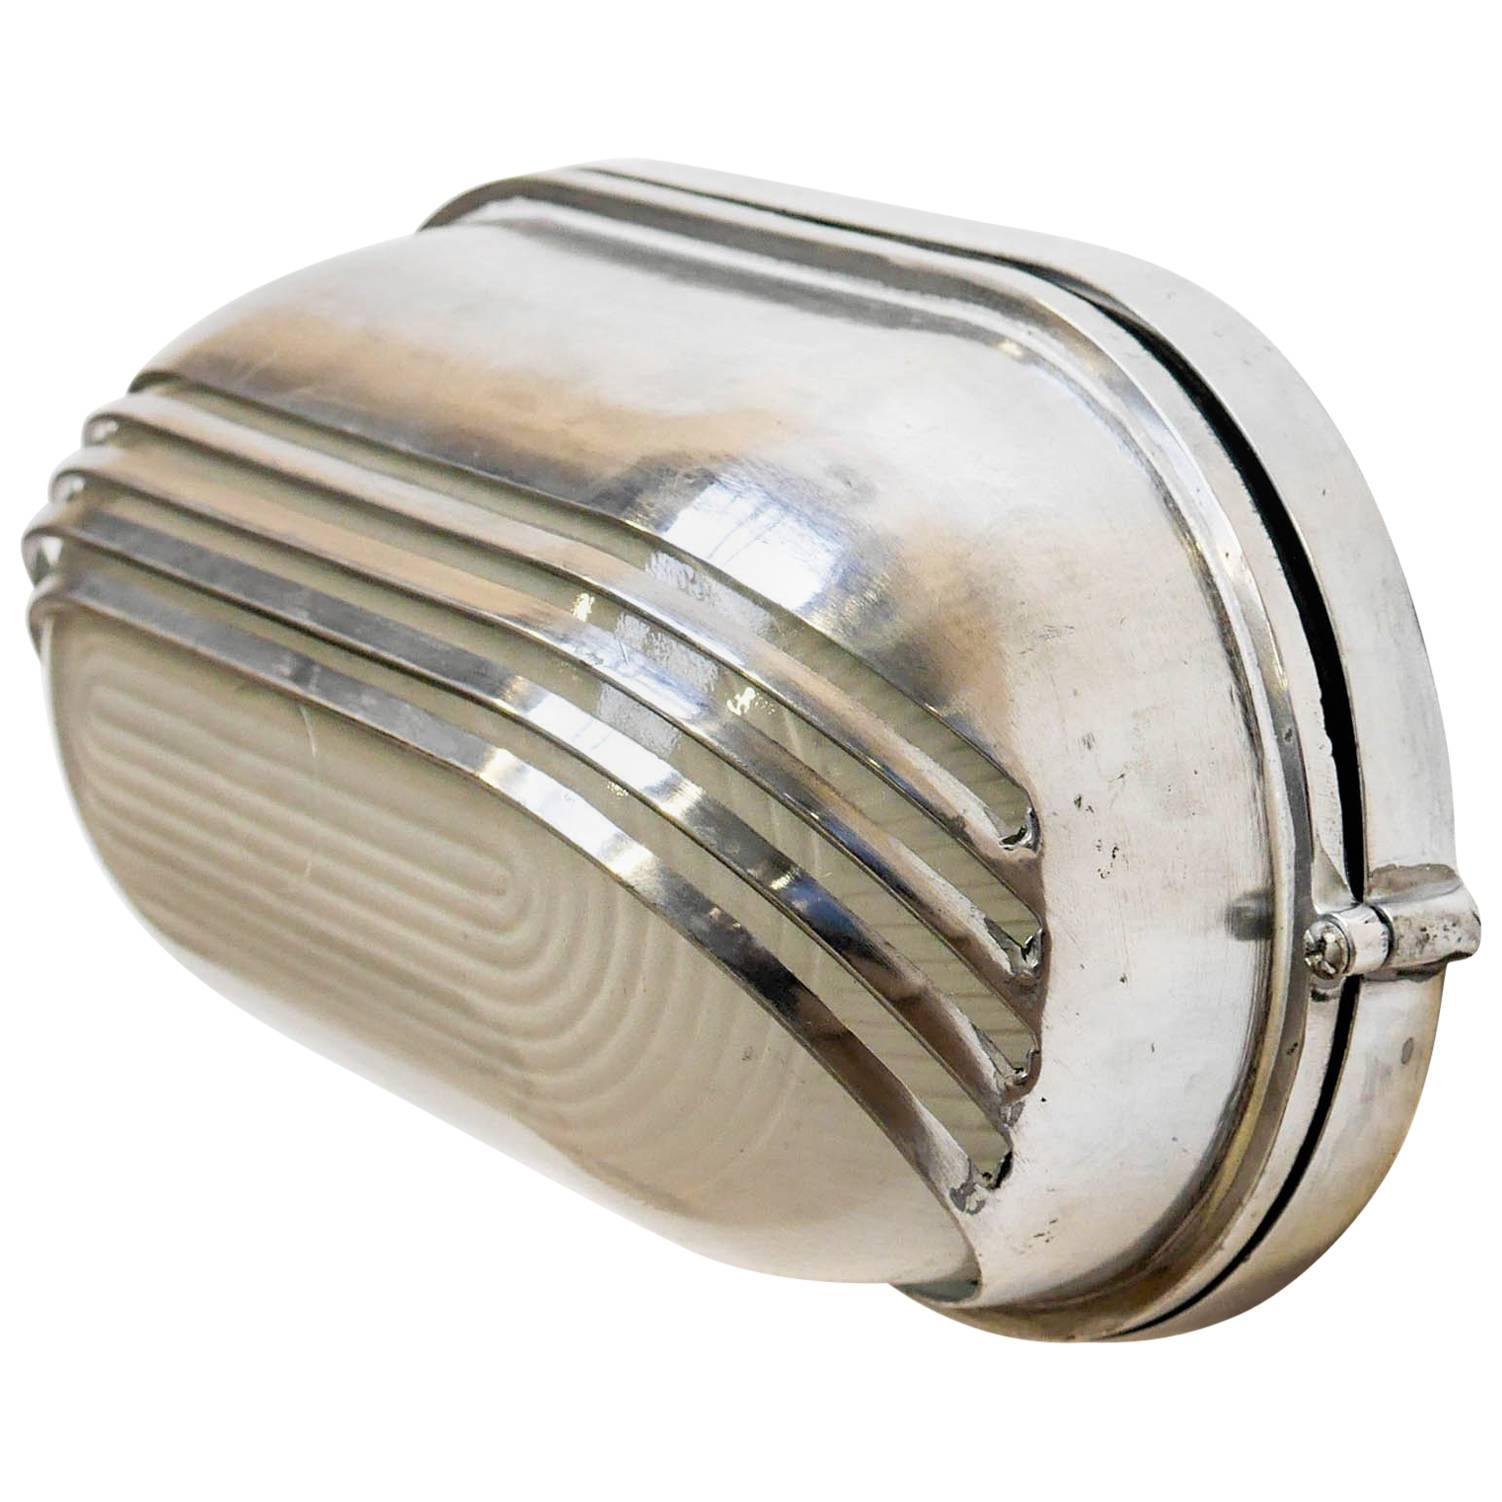 Openworked Wall Light Large, in Polished Aluminium and Reeded Glass, circa 1970